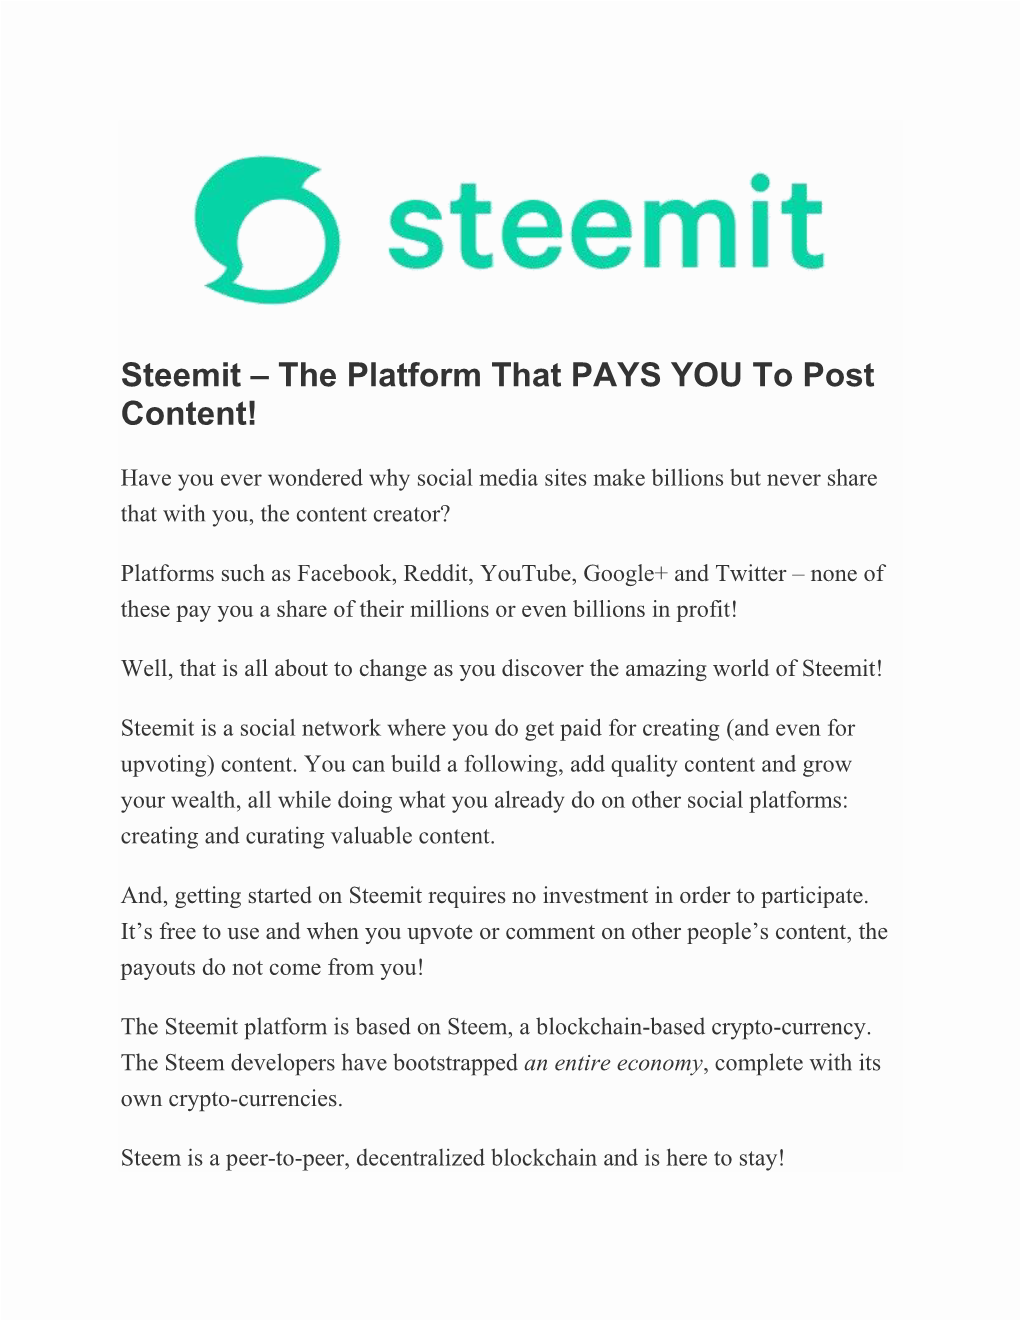 Steemit – the Platform That PAYS YOU to Post Content!